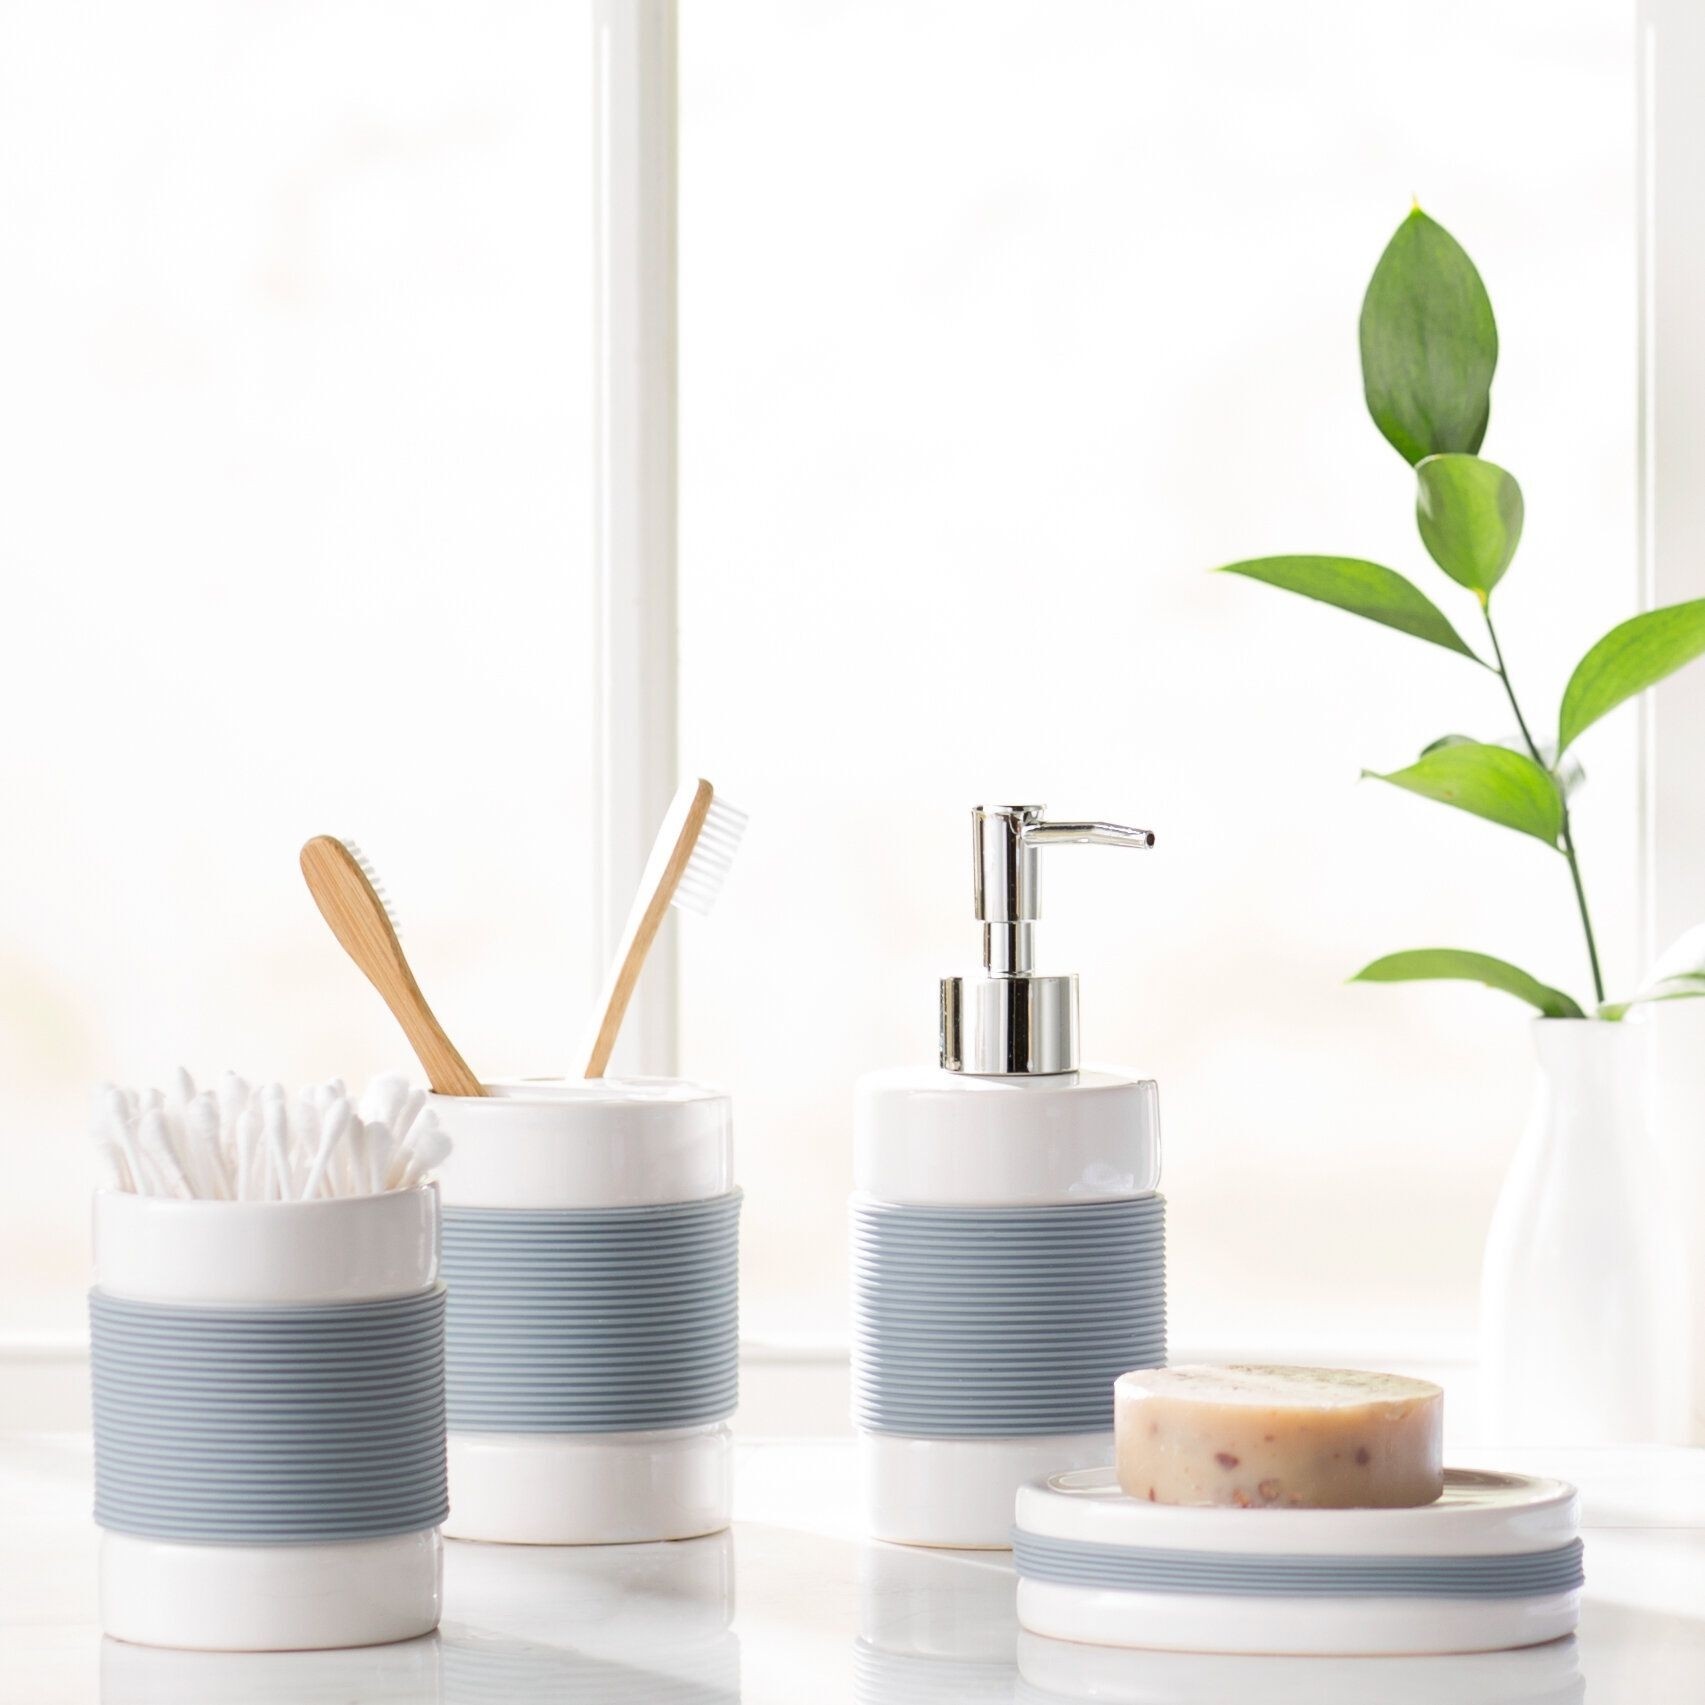 How to Choose Bathroom Accessories - Foter